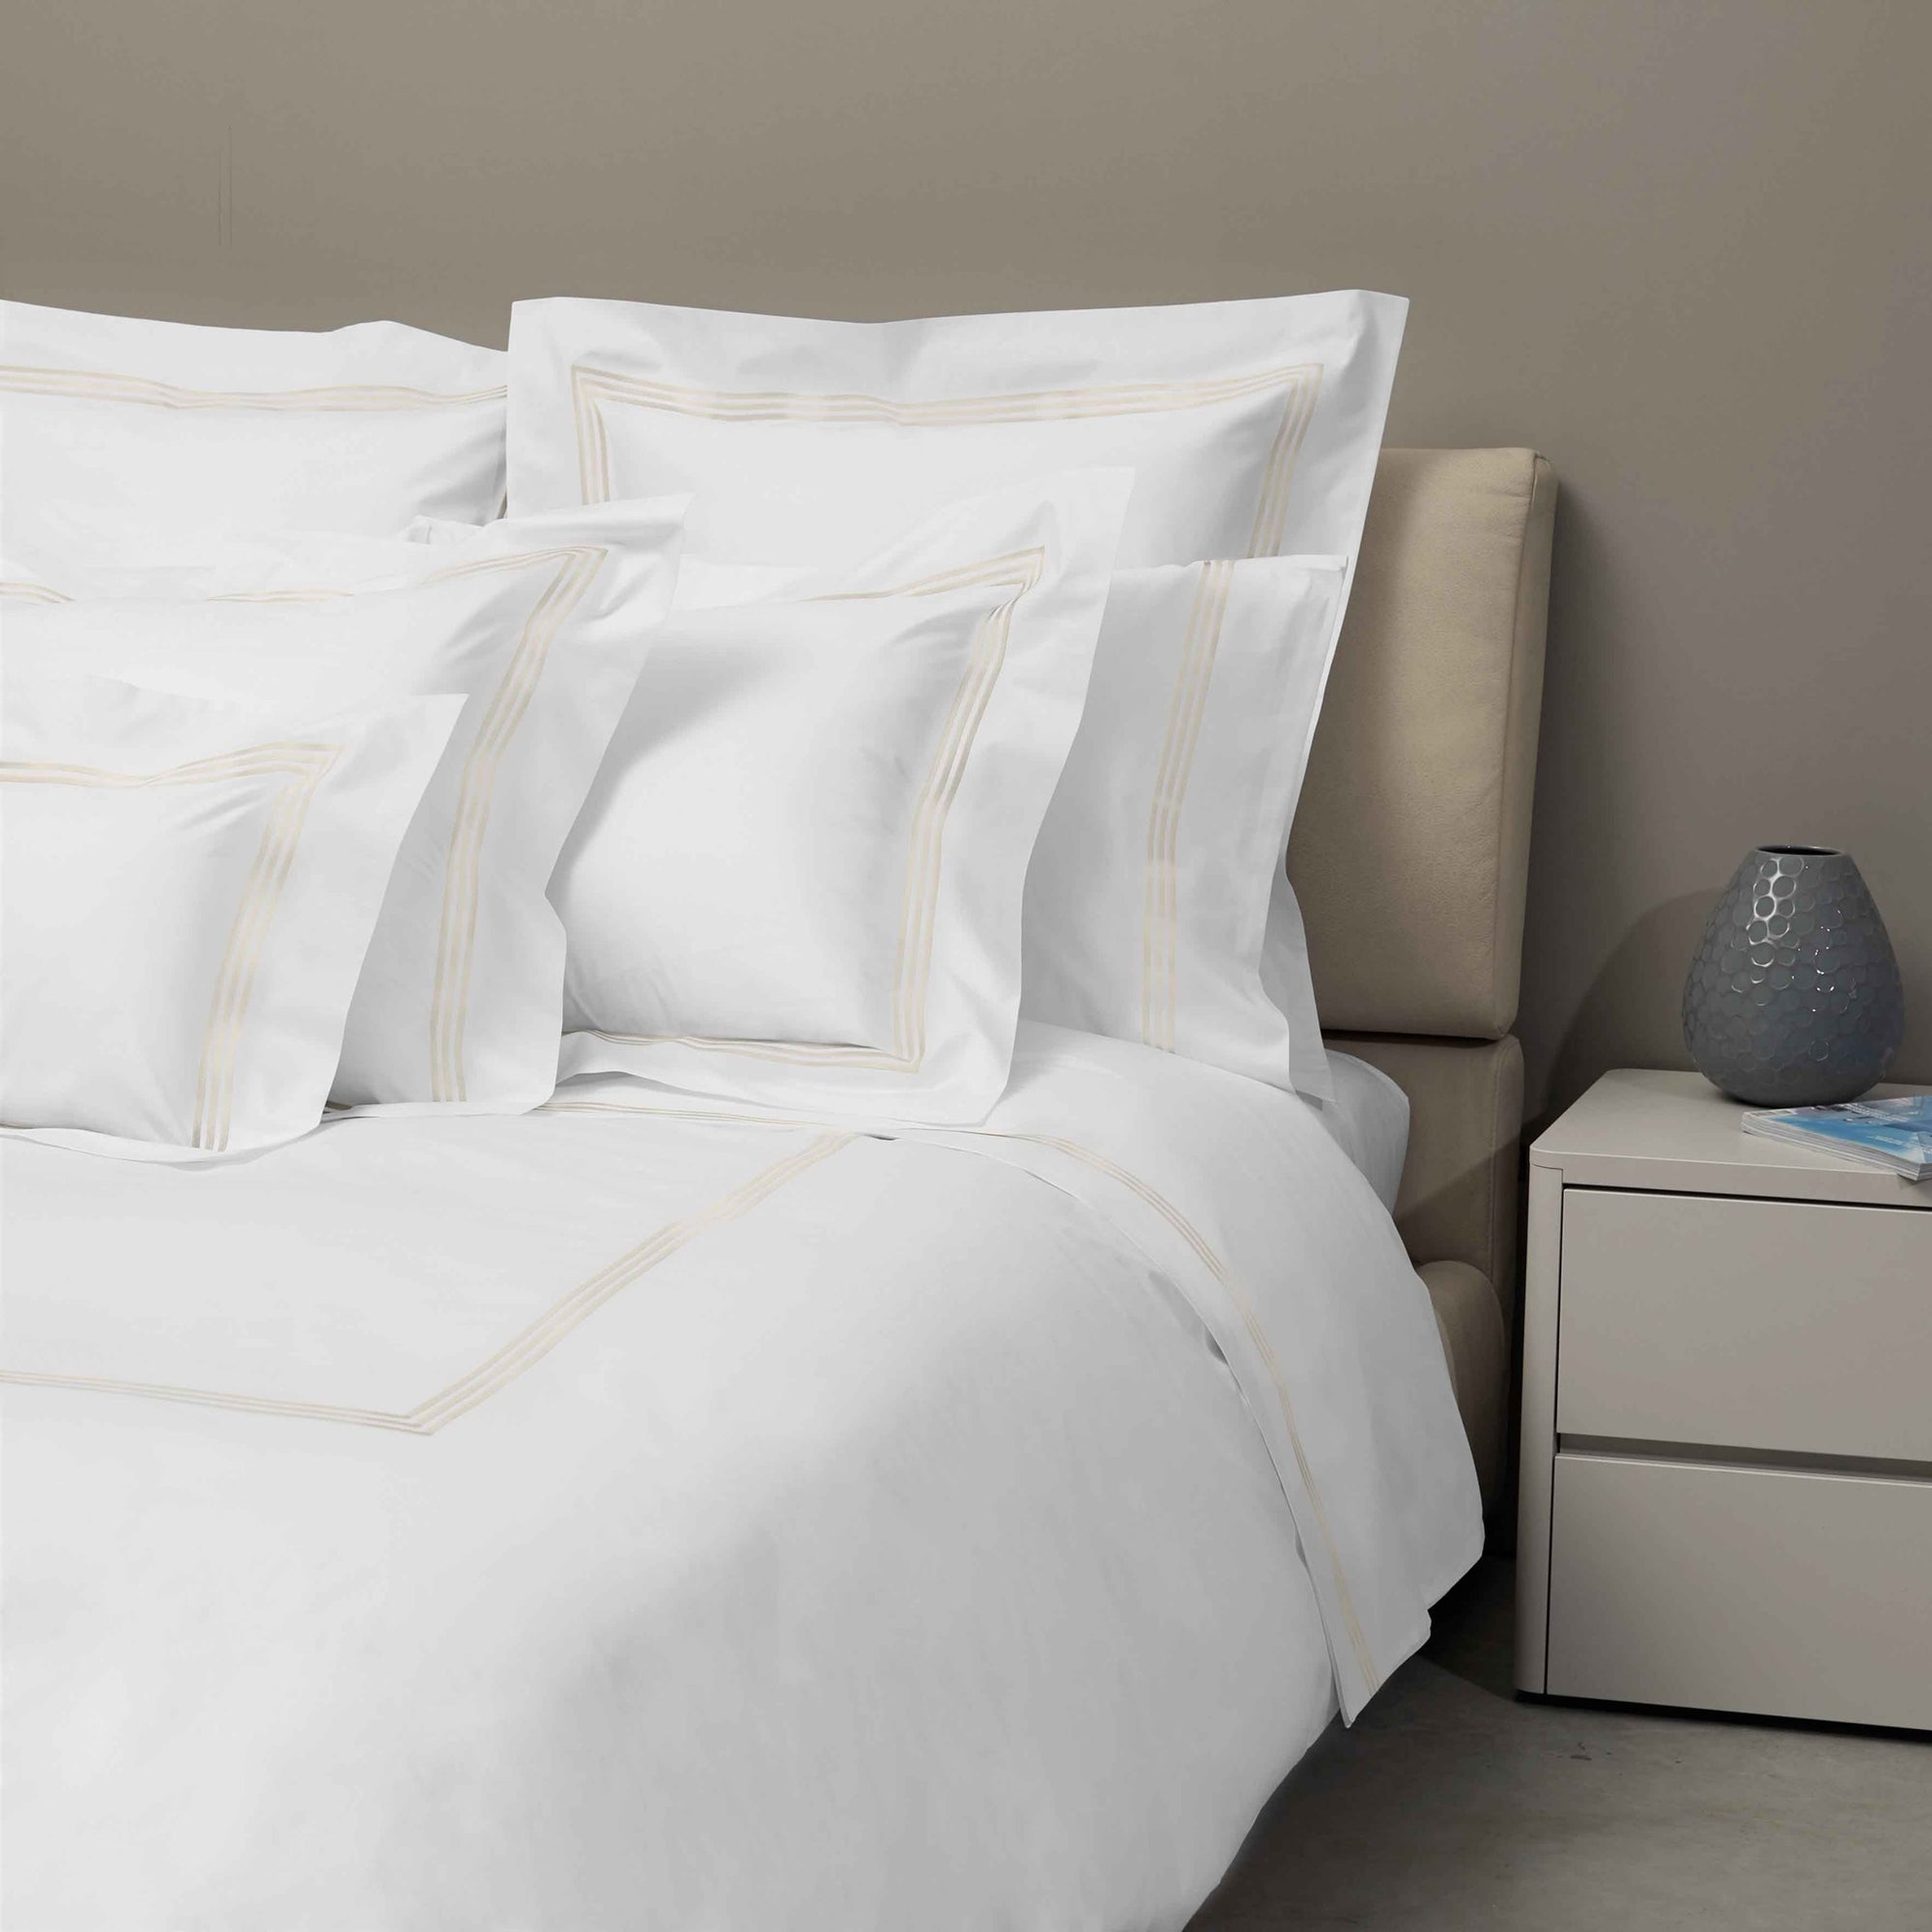 Bed Dressed in Signoria Platinum Percale Bedding in White/Ivory Color